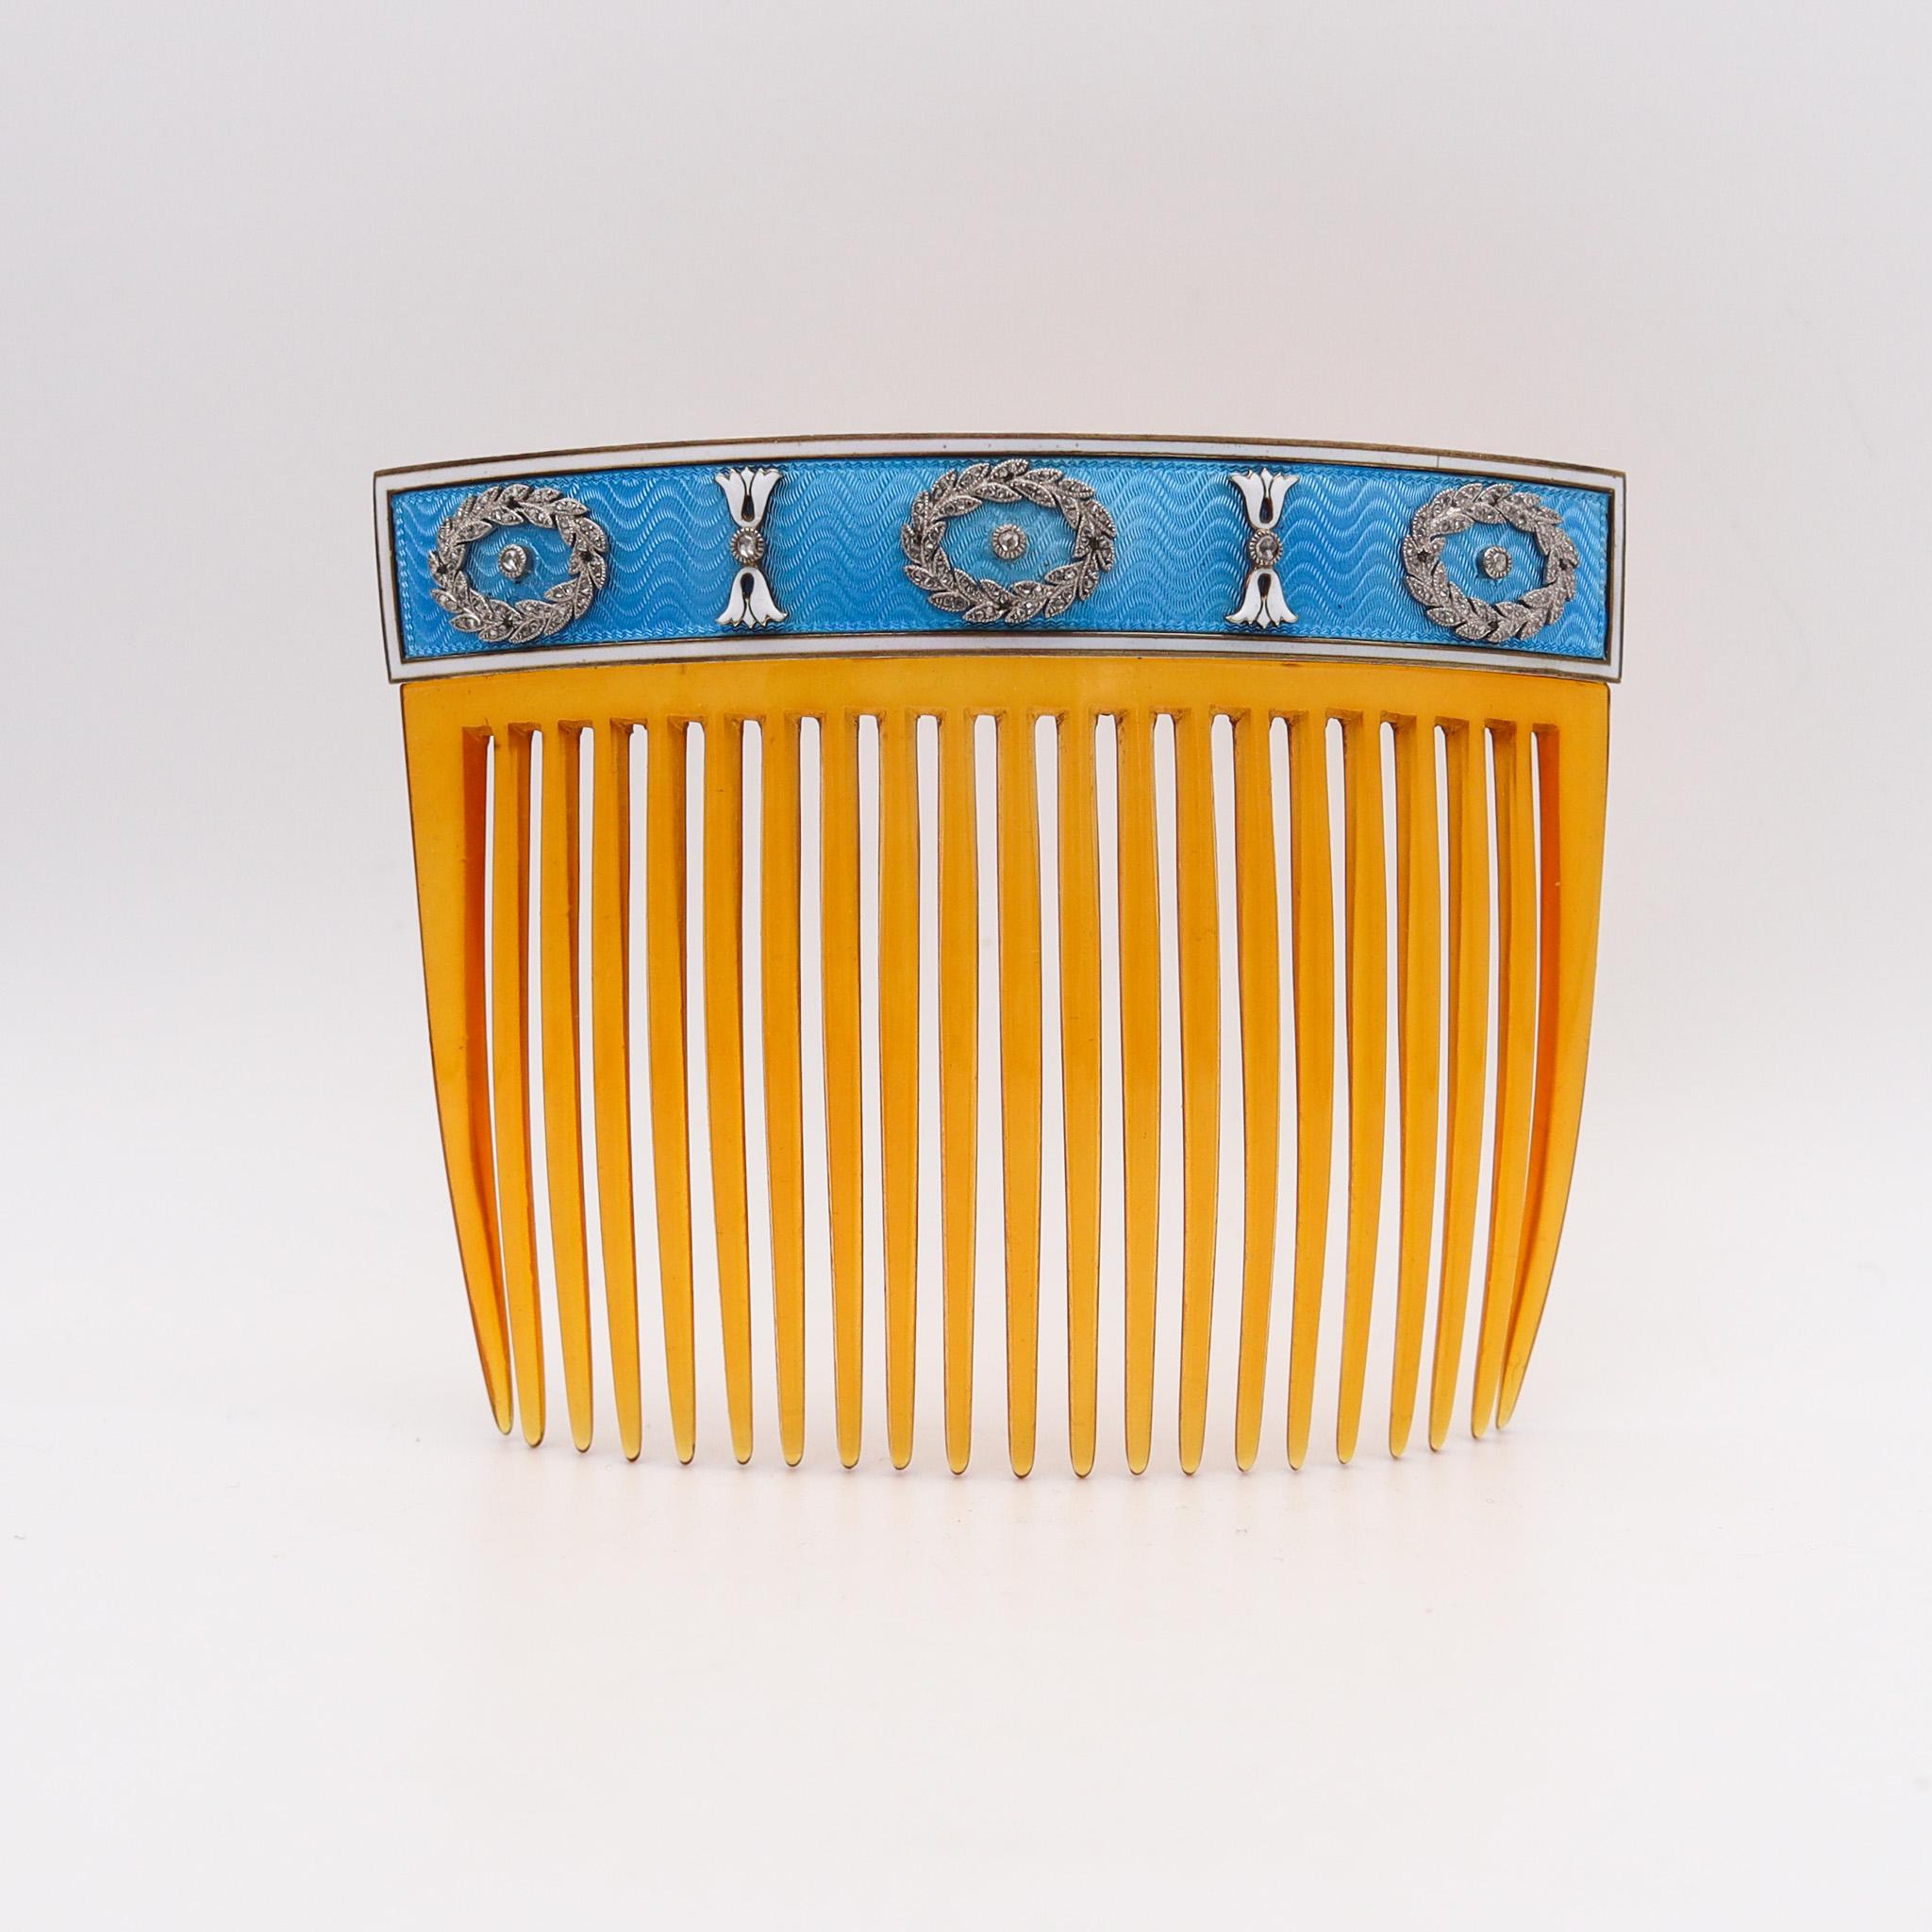 Cartier Paris 1900 Edwardian Enameled Hairs-Comb in 18Kt Gold With Diamonds In Excellent Condition For Sale In Miami, FL